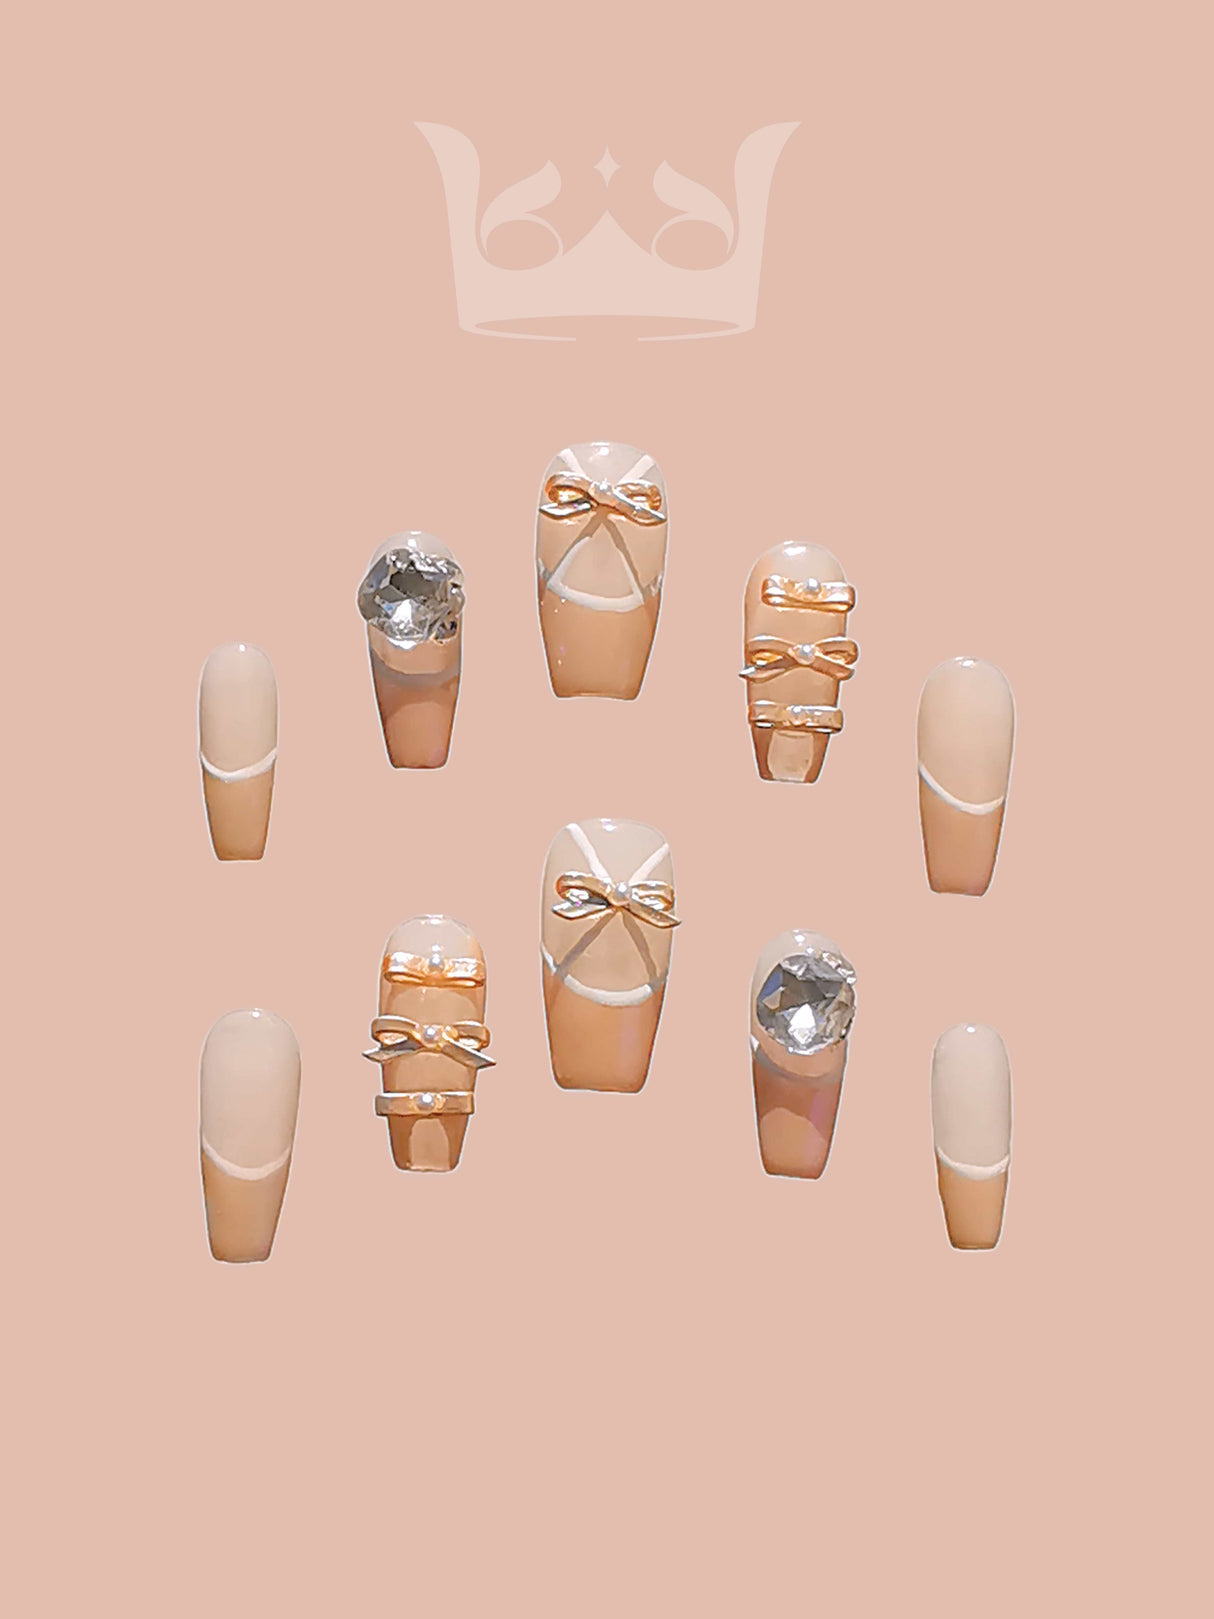 These versatile nails feature a minimalist design with gold foil accents and a neutral color palette, suitable for both casual and formal events.